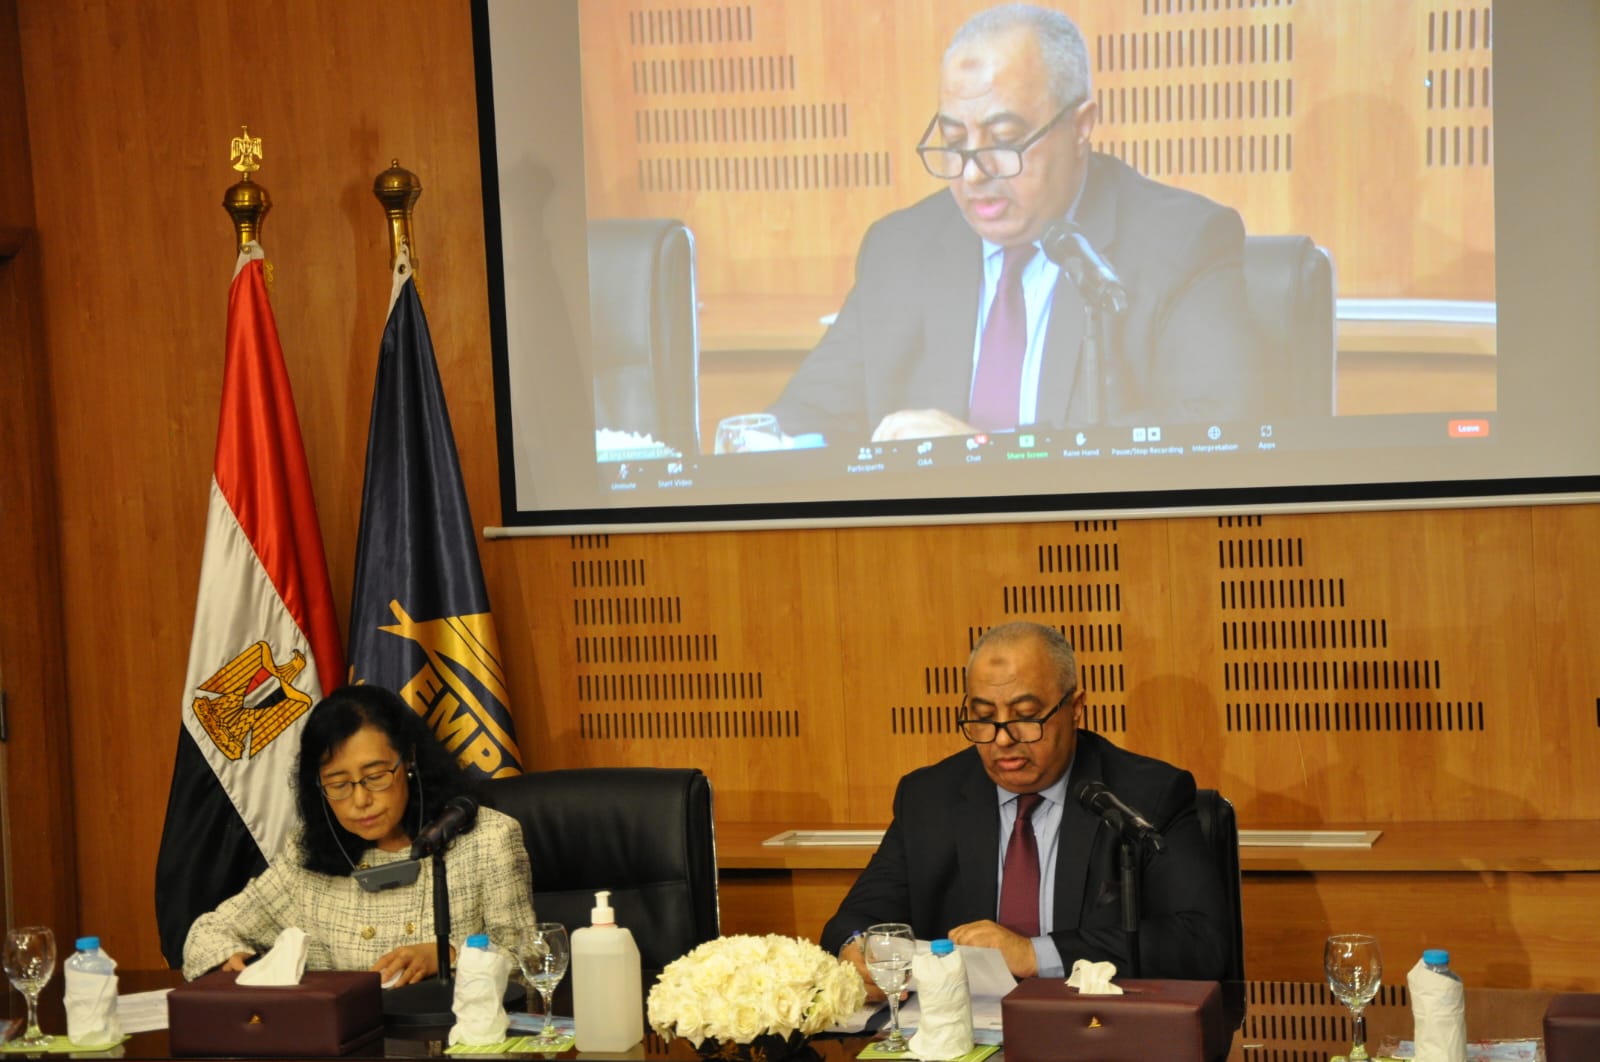 Al-Gibali during the Activities of the UNESCO International Session